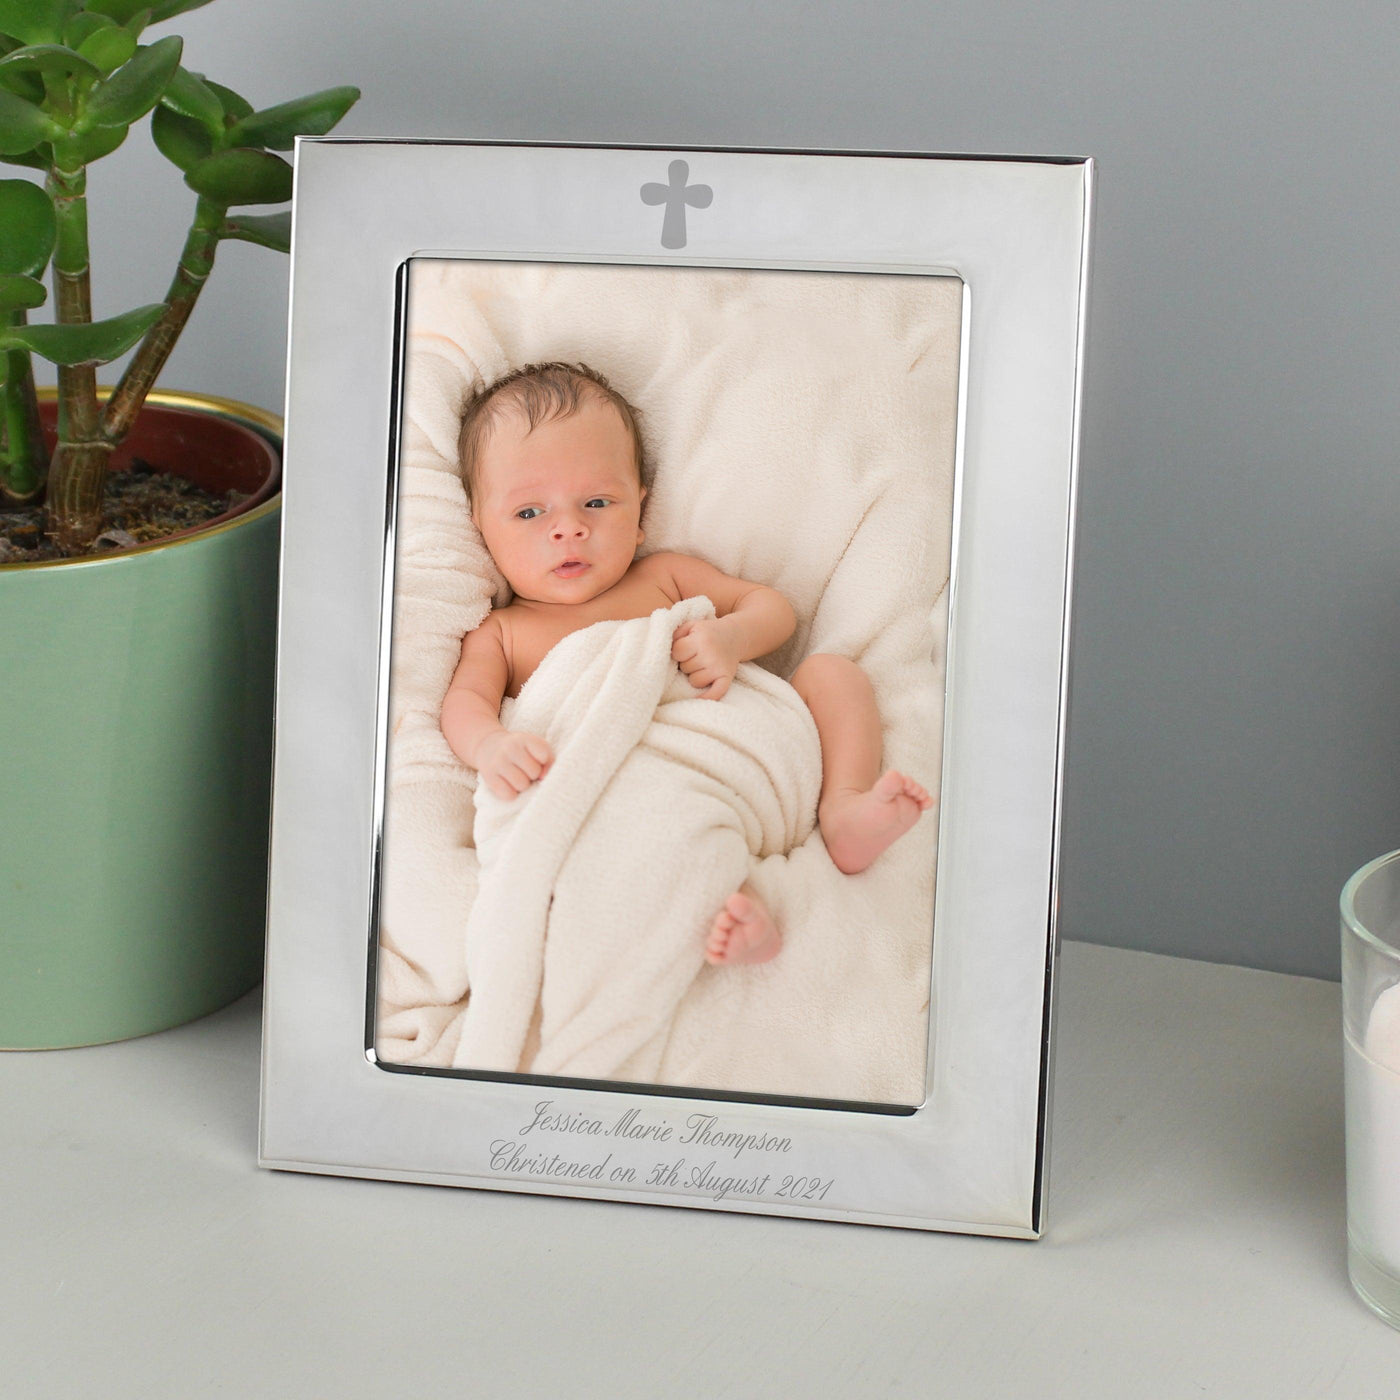 Personalised Silver Plated 5x7 Elegant Cross Photo Frame - Shop Personalised Gifts